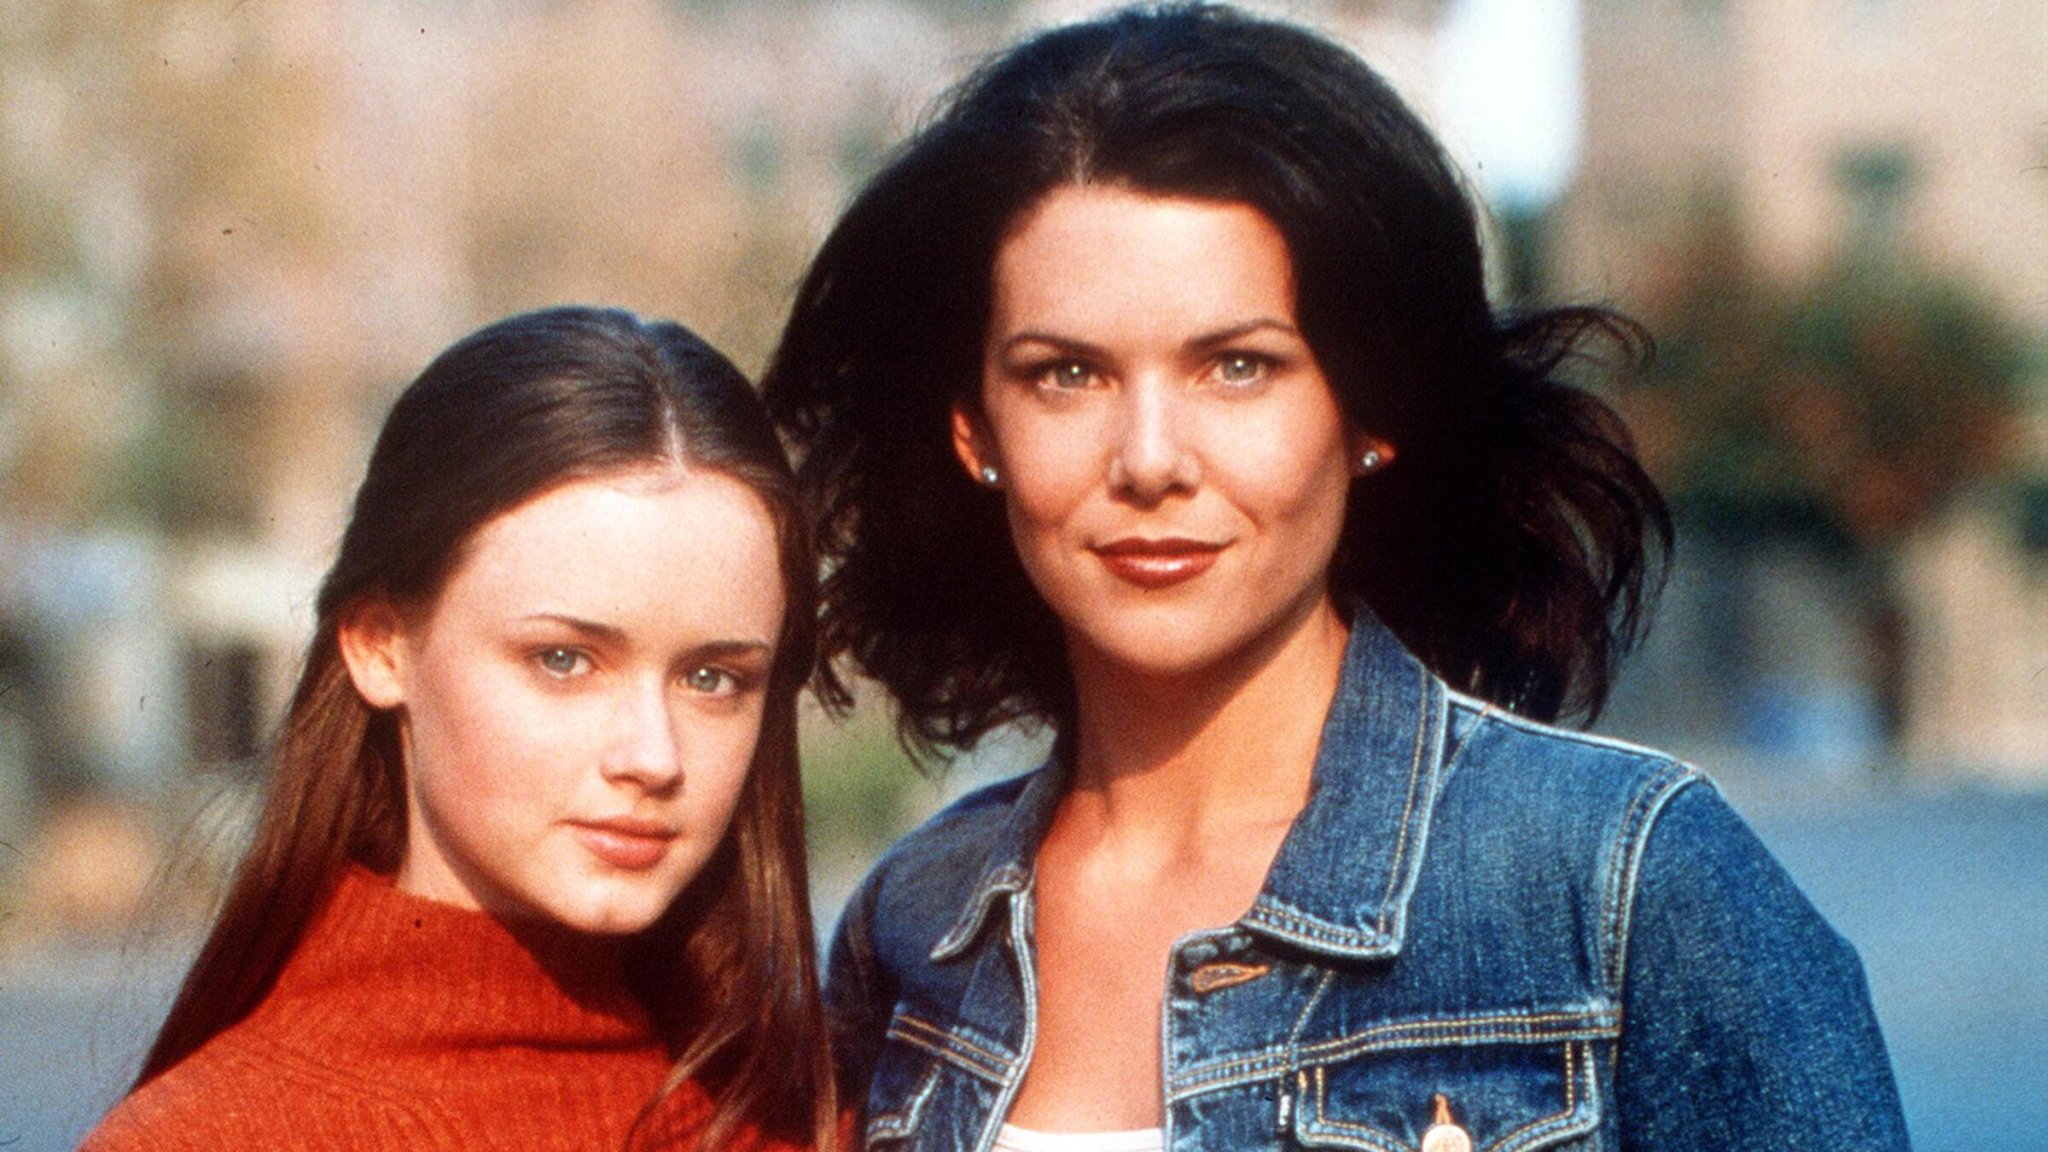 Gilmore Girls' 20th Anniversary: Looking Back on the Greatness of The WB Series